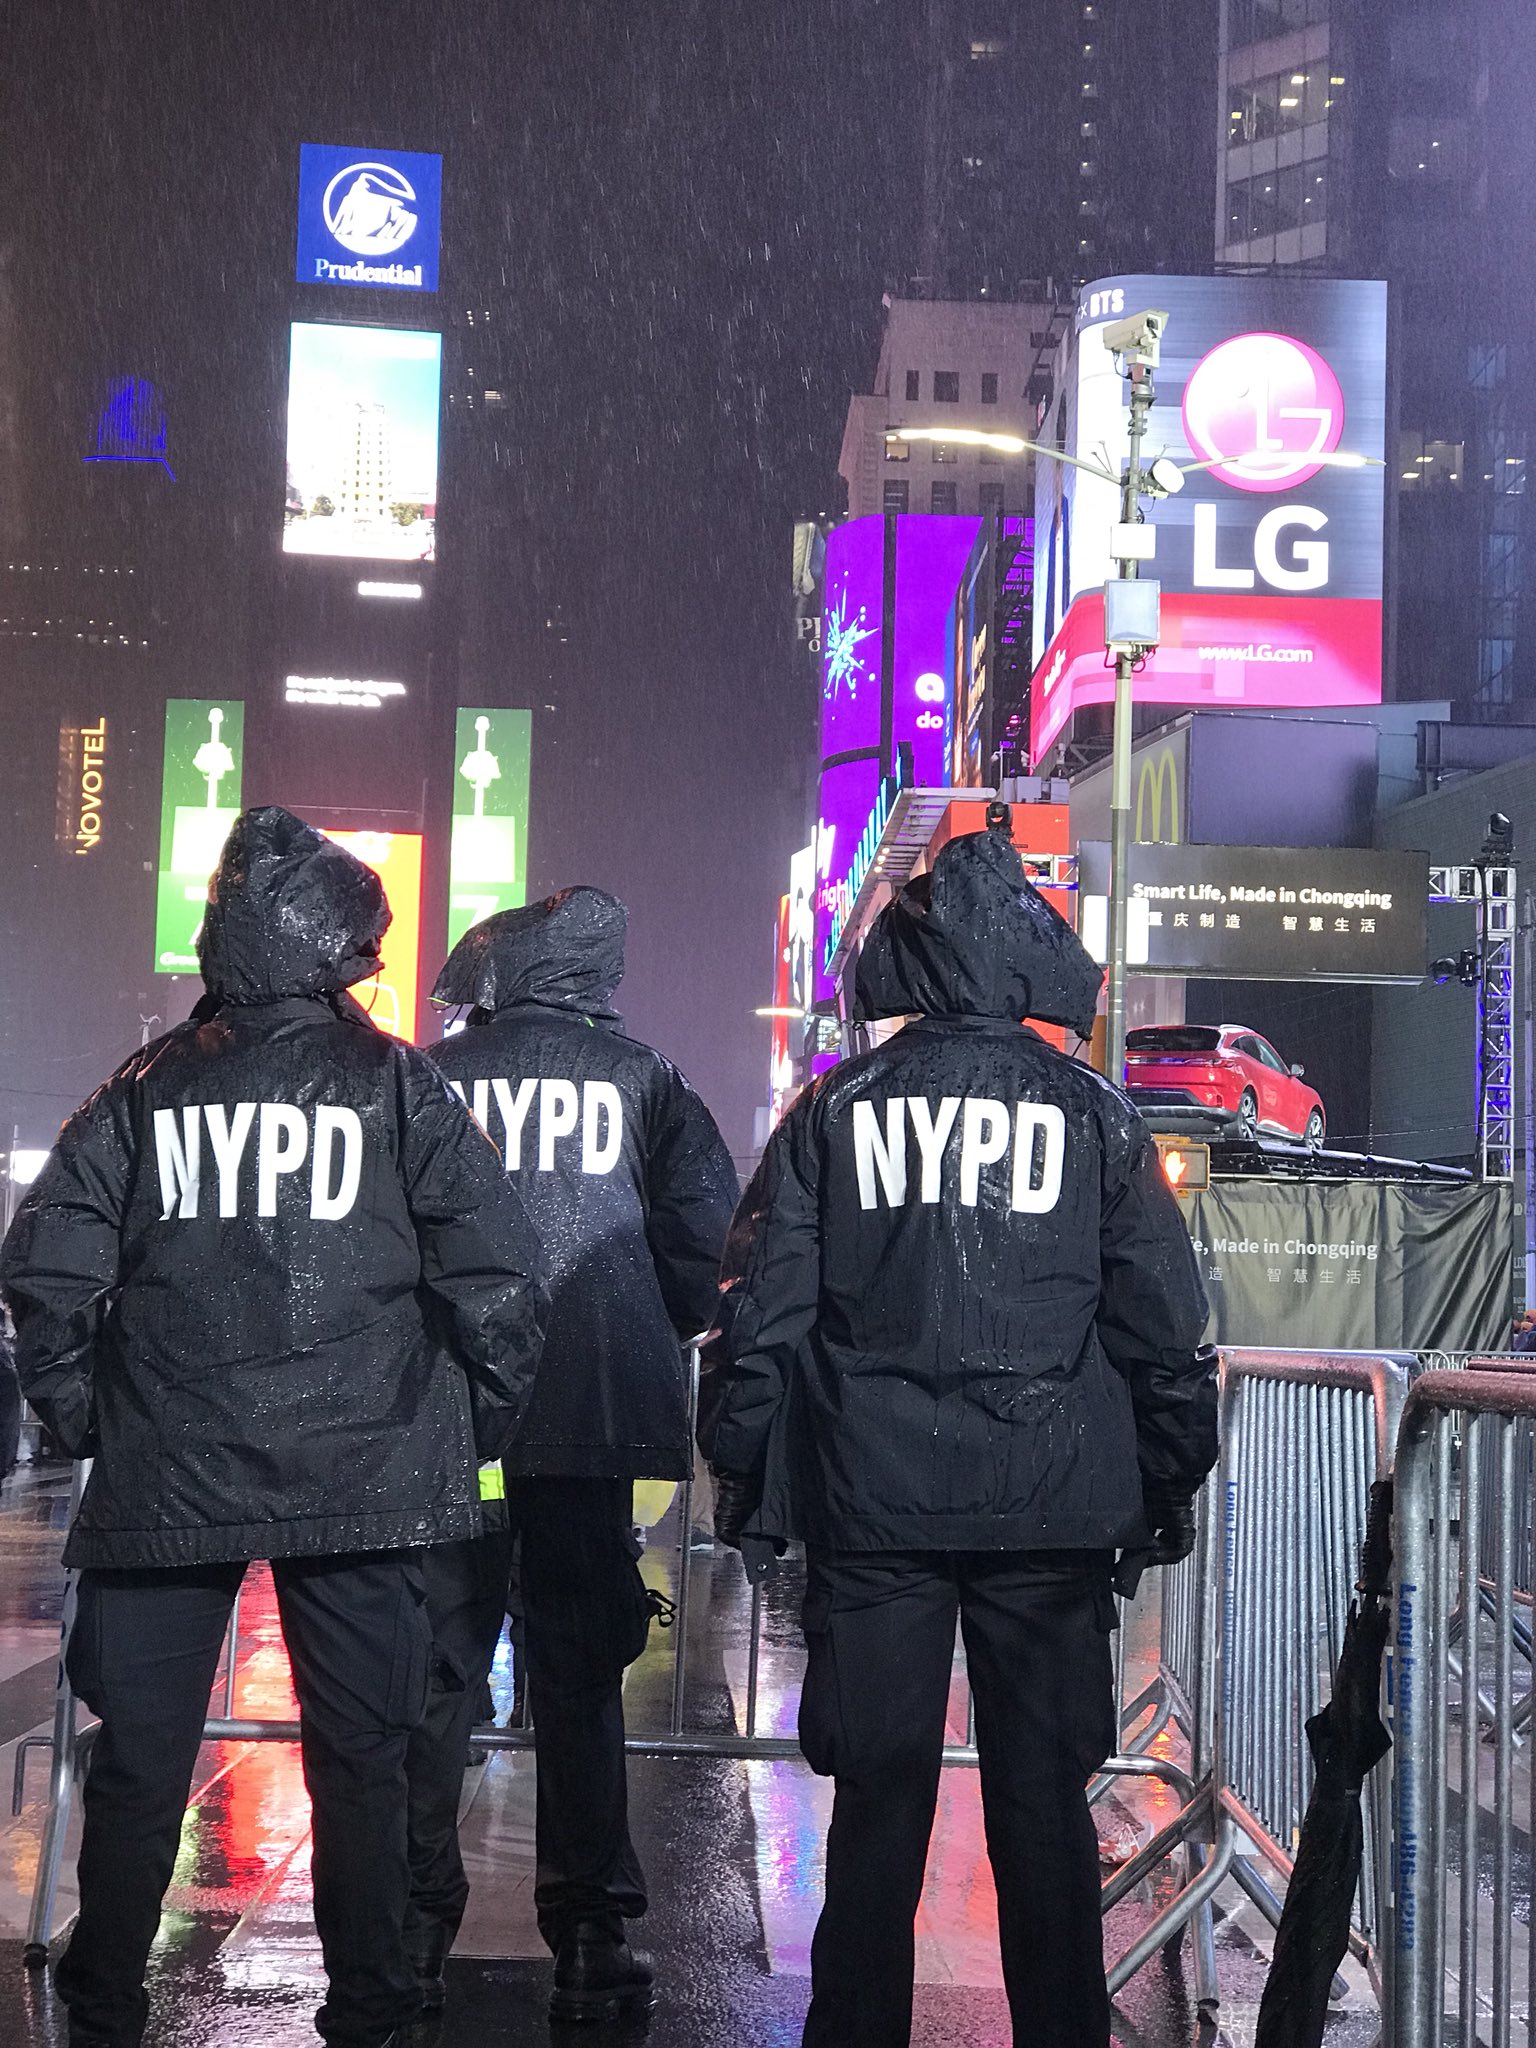 NYPD NEWS on Twitter: "We refuse to let the rain put a damper on our  #RockinEve⁠ ⁠party in #TimesSqaure. Let the show go on!  https://t.co/yTA8gKodXj" / Twitter